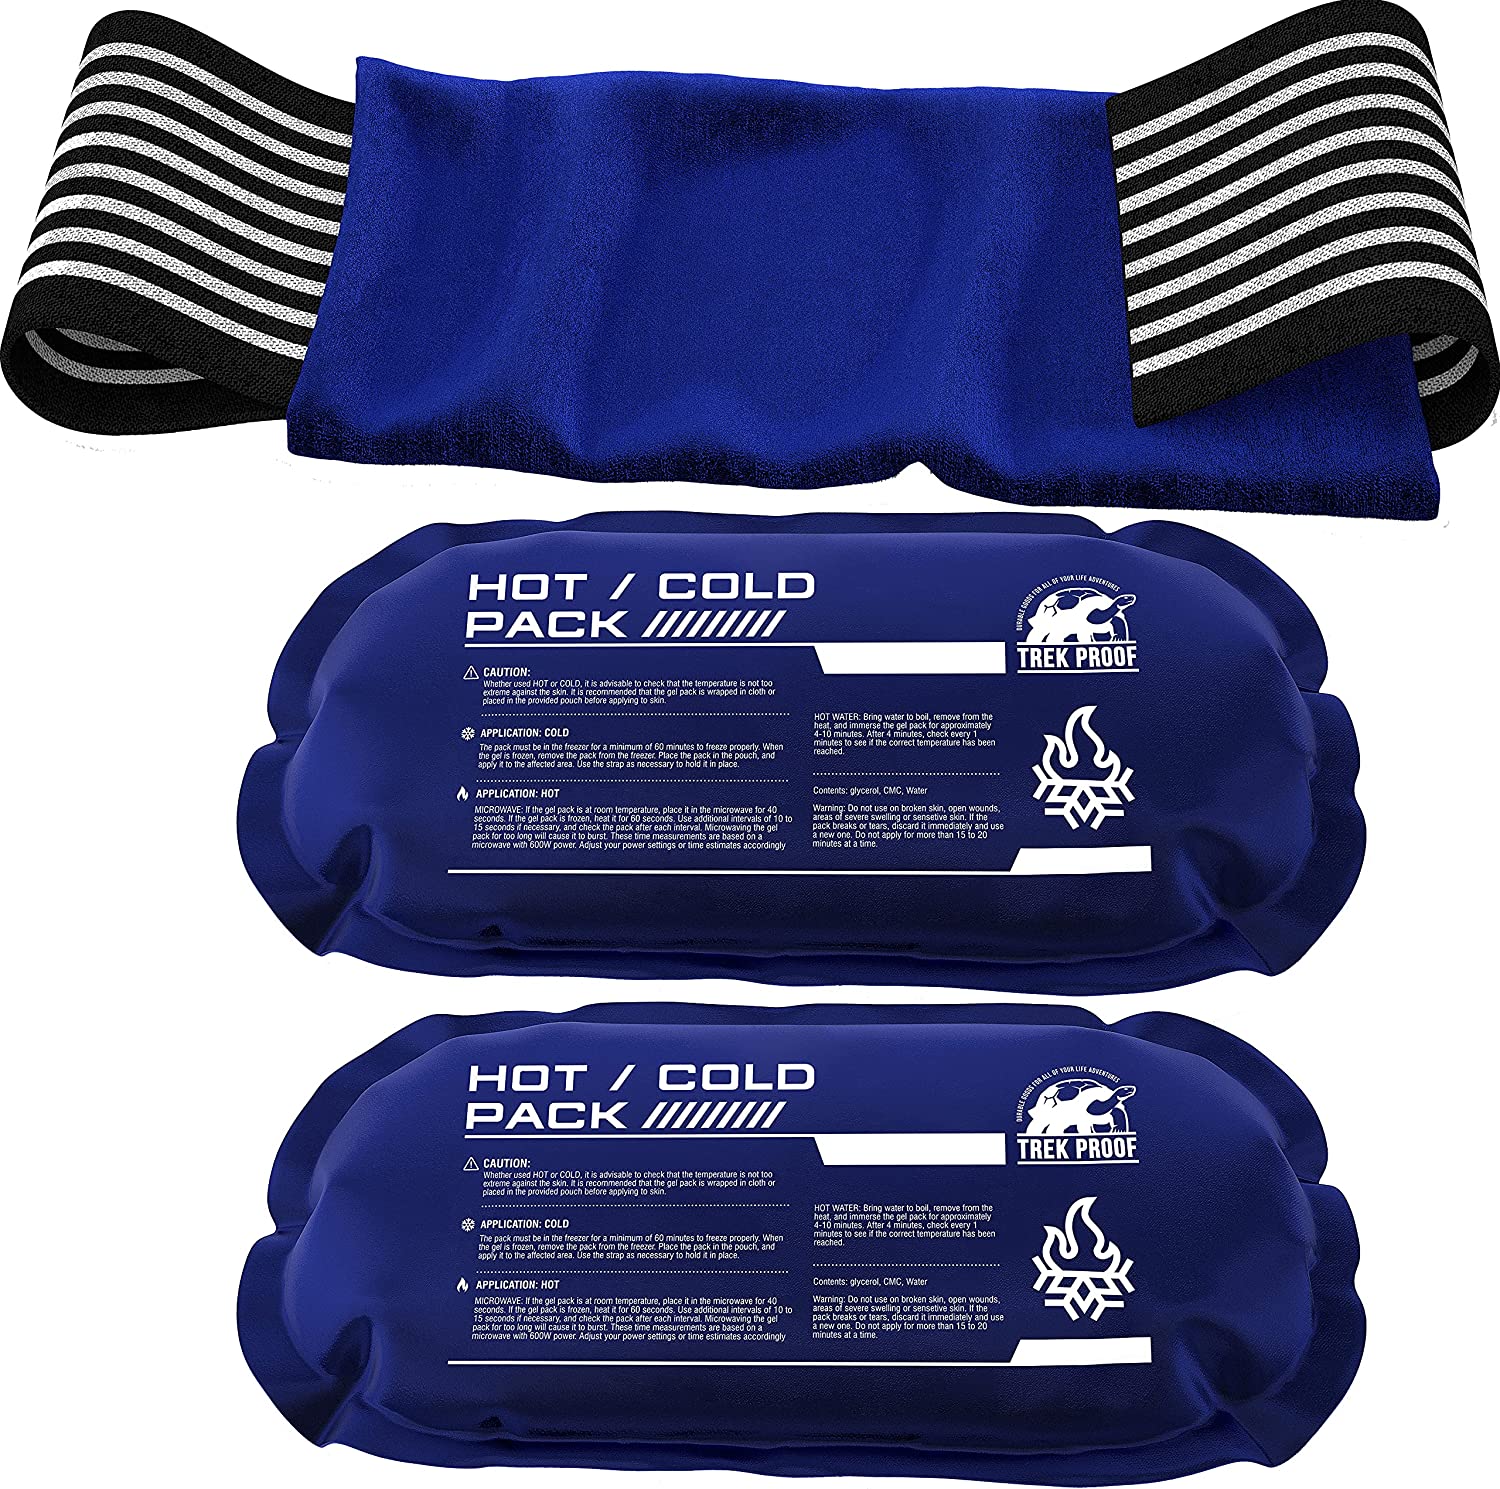 Large Hot & Cold Packs(2) with wrap